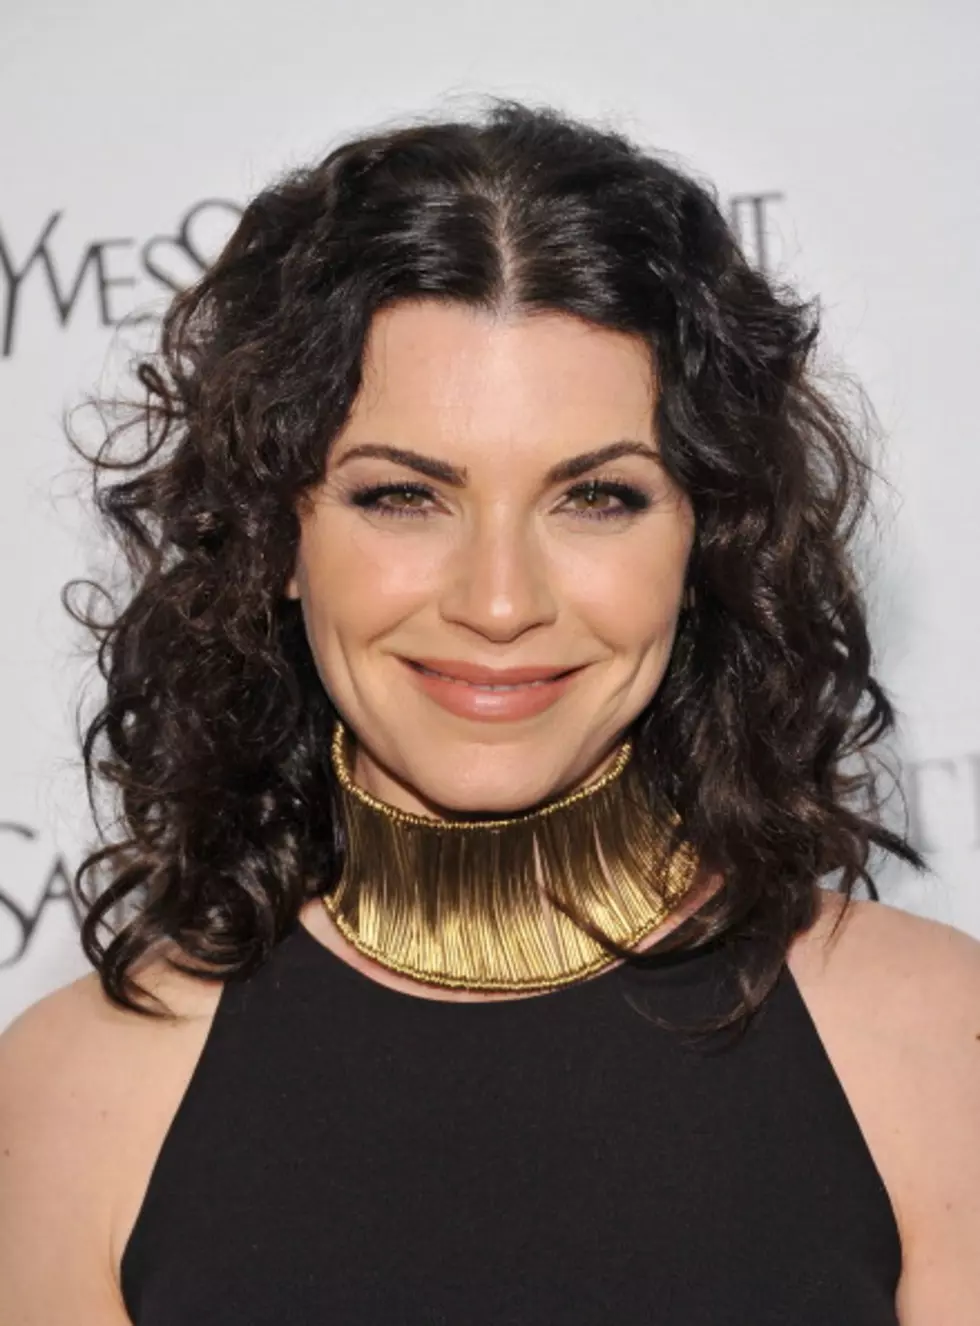 ‘The Good Wife’, Julianna Margulies, Kanye West, and Wednesday’s Other Celebrity Birthdays